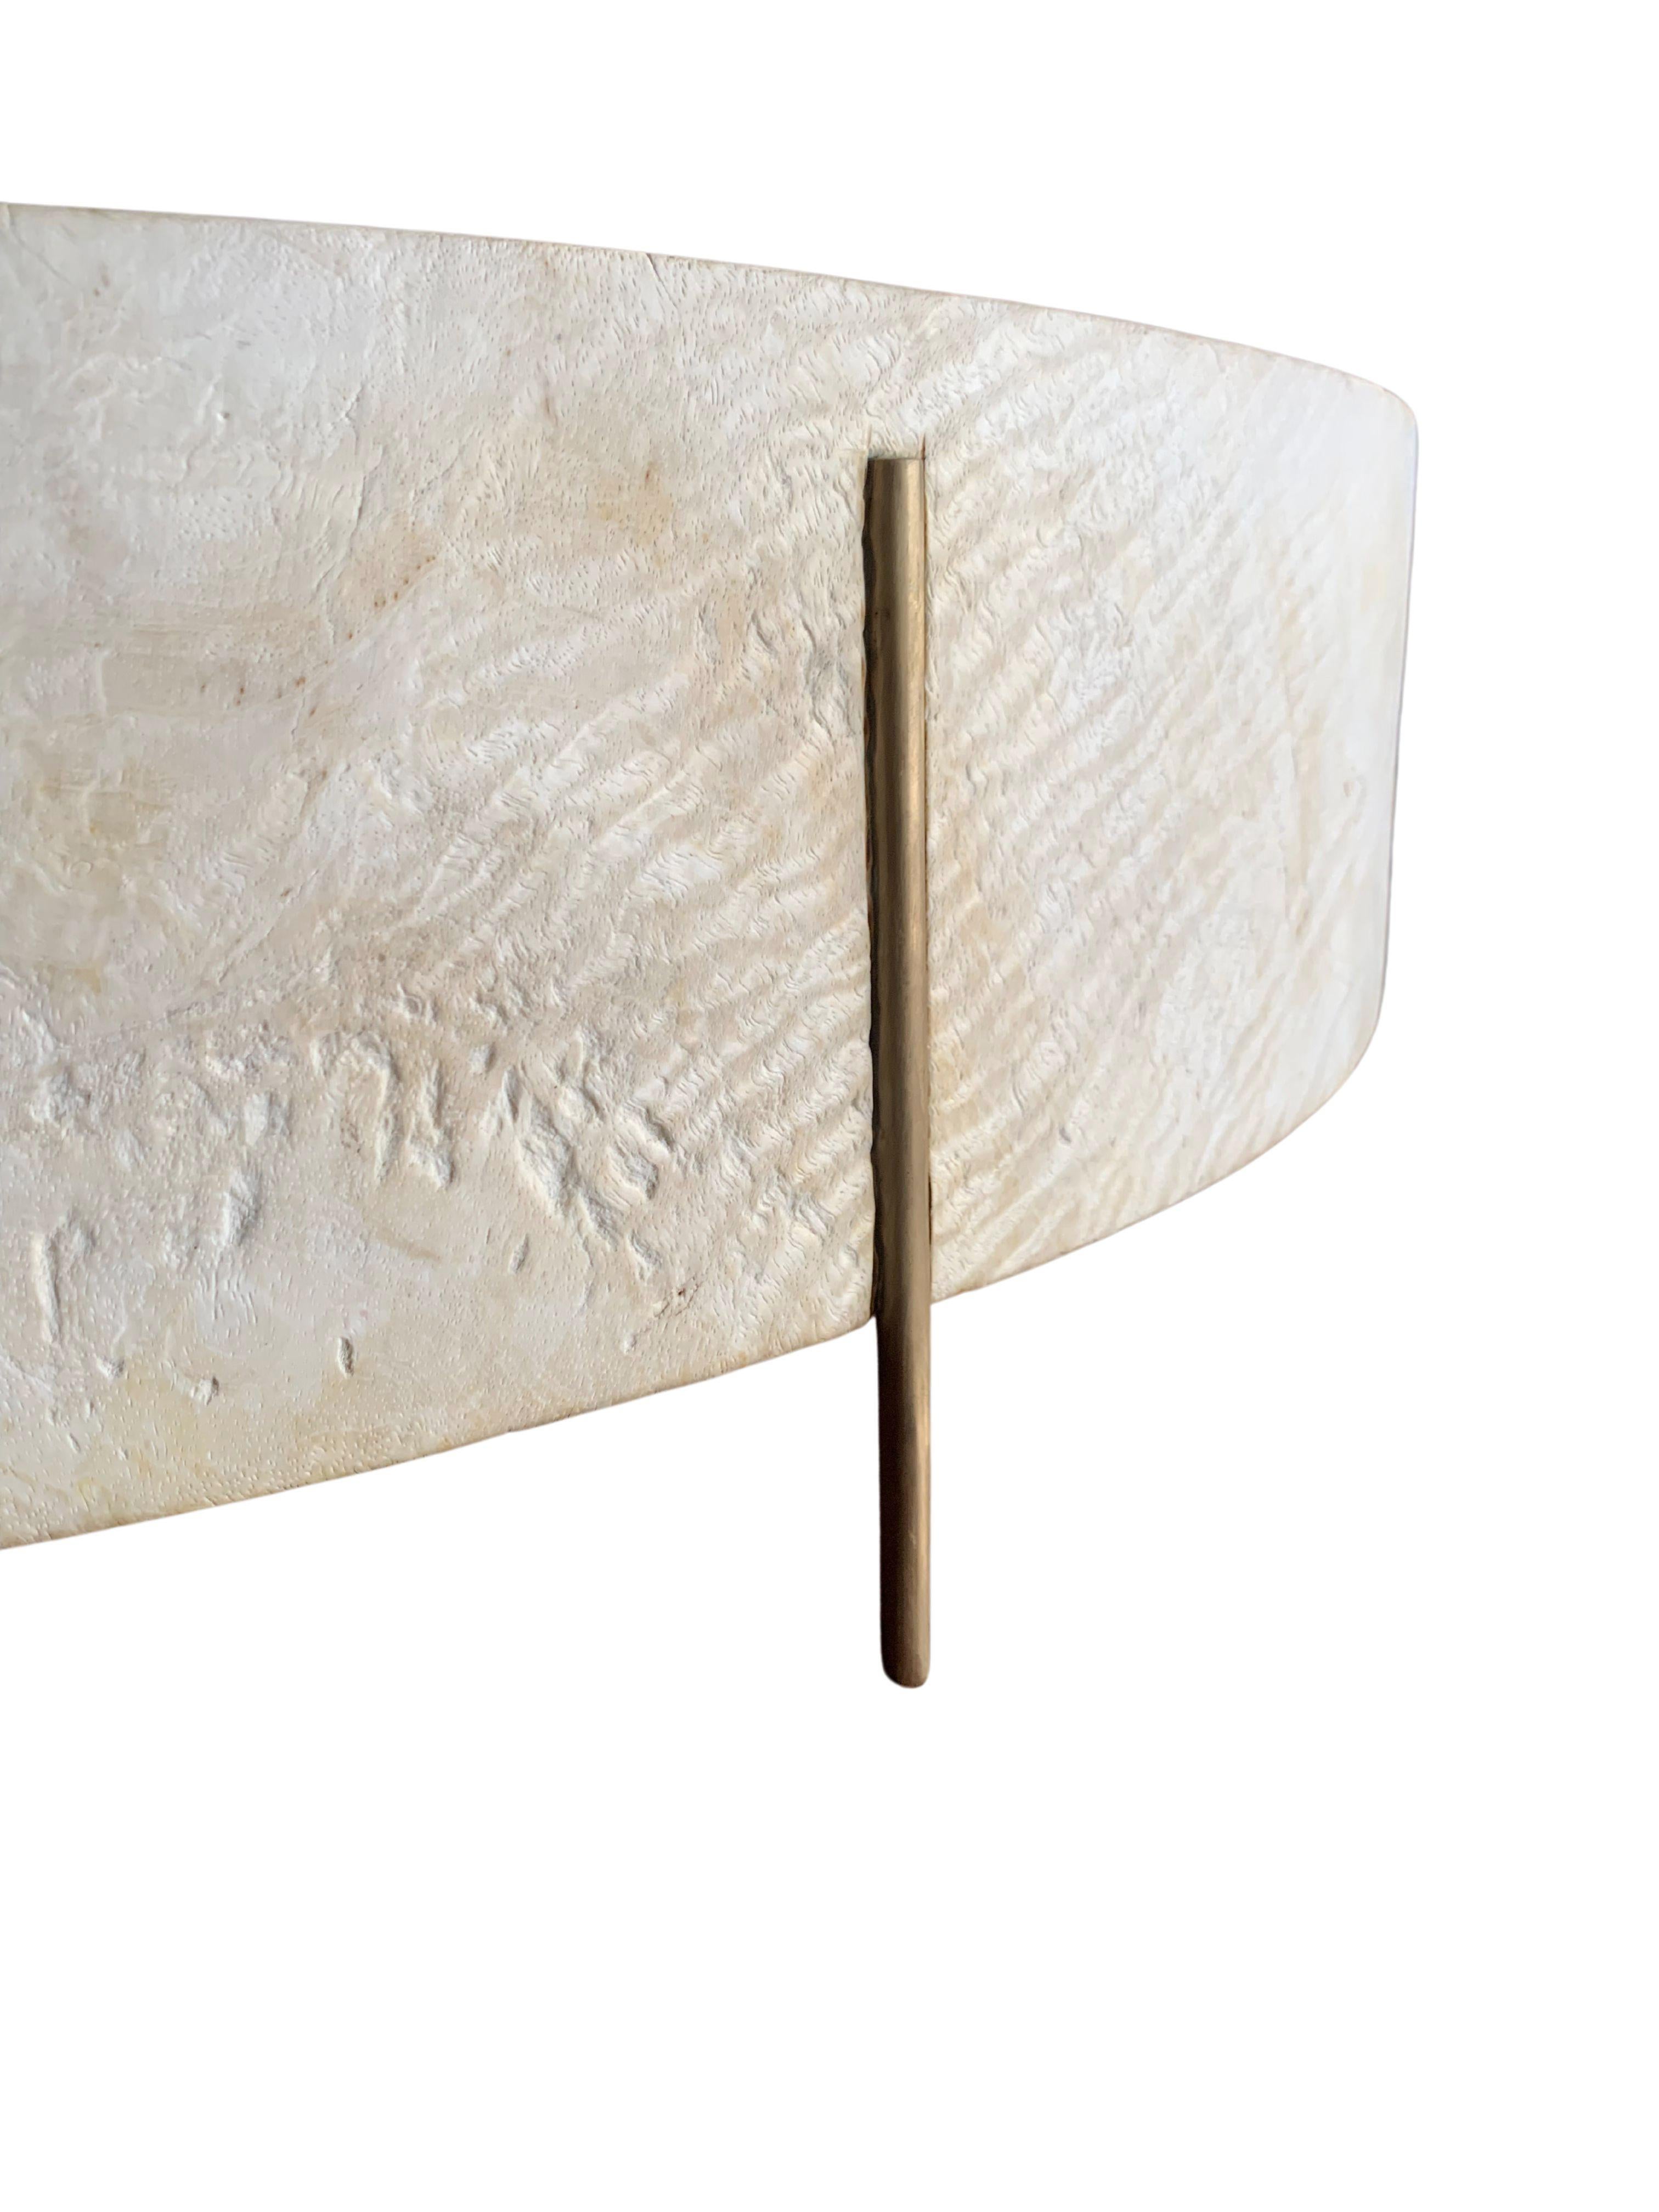 Indonesian Modern Organic Side Table Crafted from Mango Wood with Brass Legs For Sale